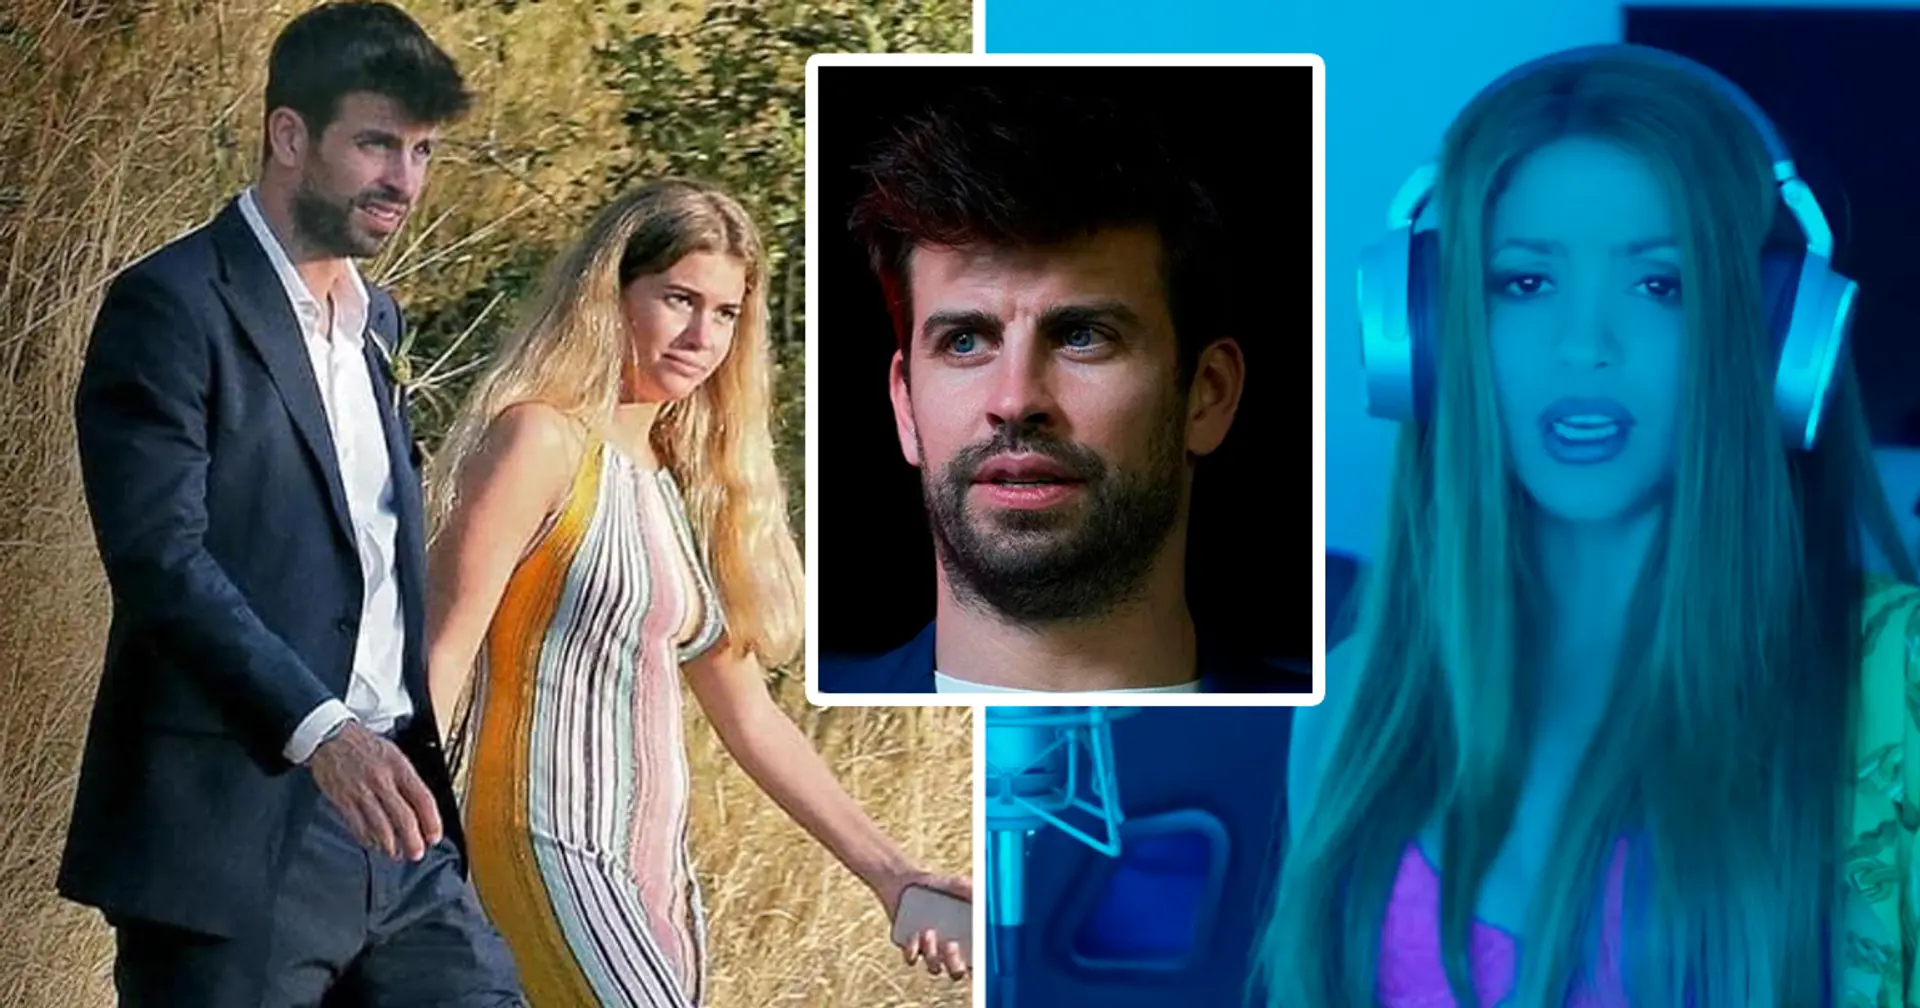 'You traded a Ferrari for a Renault': Shakira aims brutal dig at Gerard Pique in new song